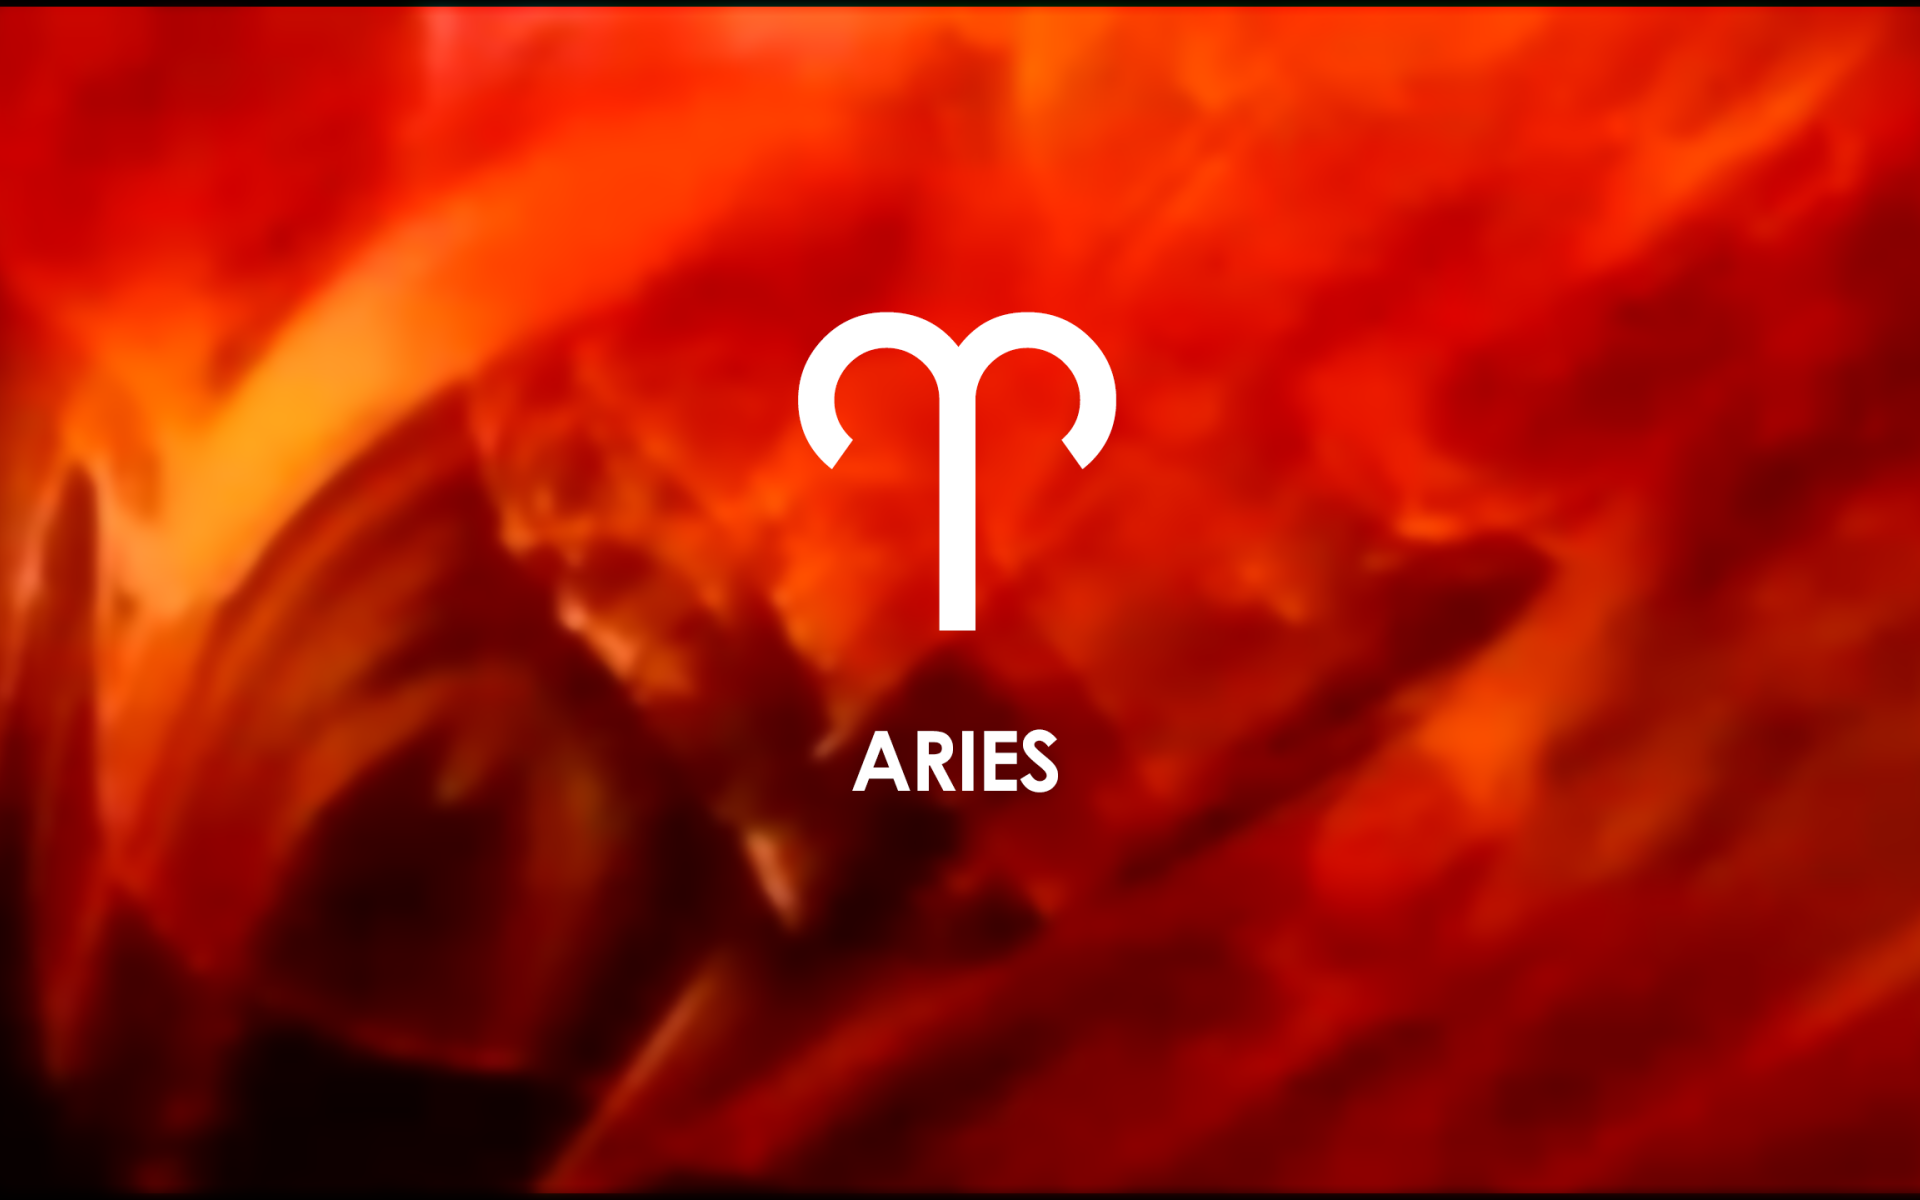 Aries sign on a red background